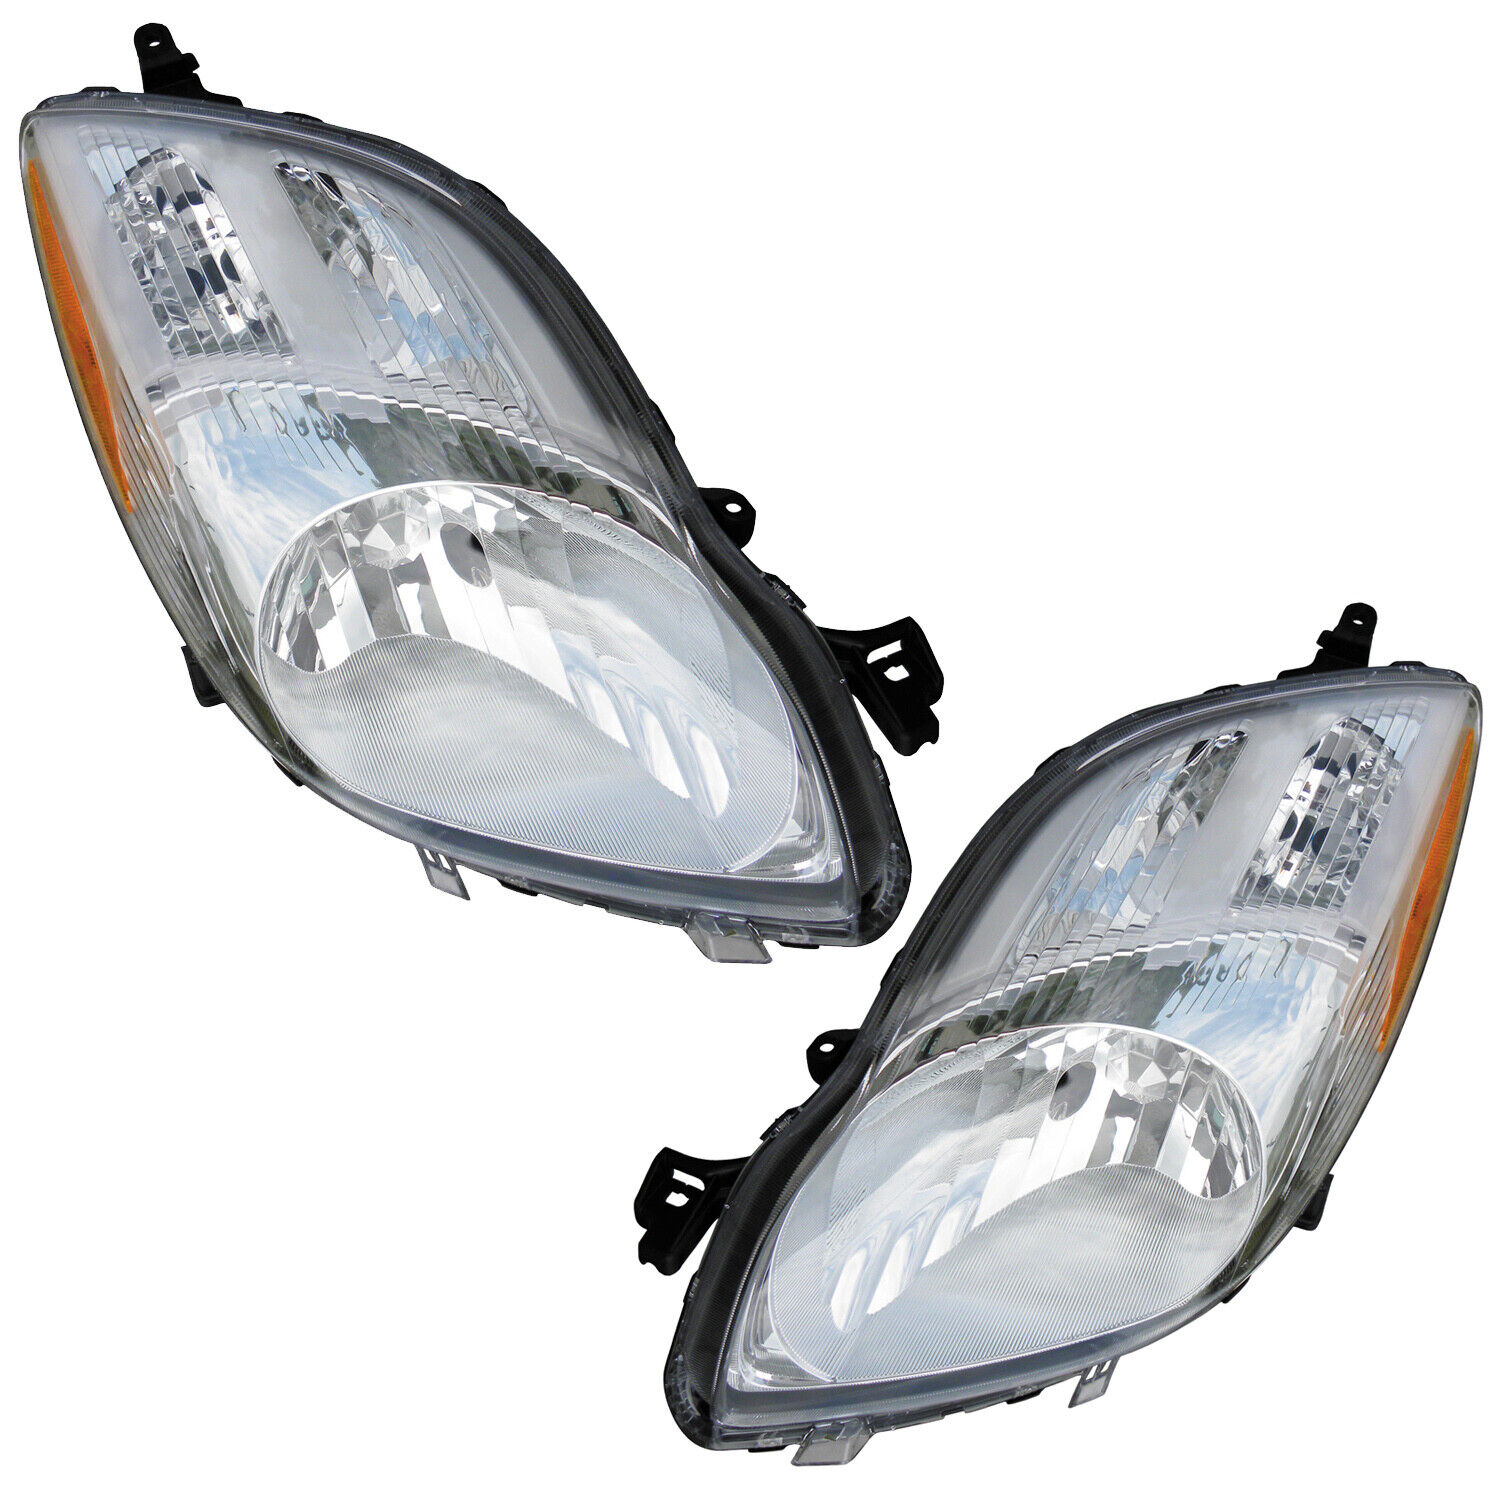 Headlights Front Lamps Pair Set for 09-11 Toyota Yaris Left & Right